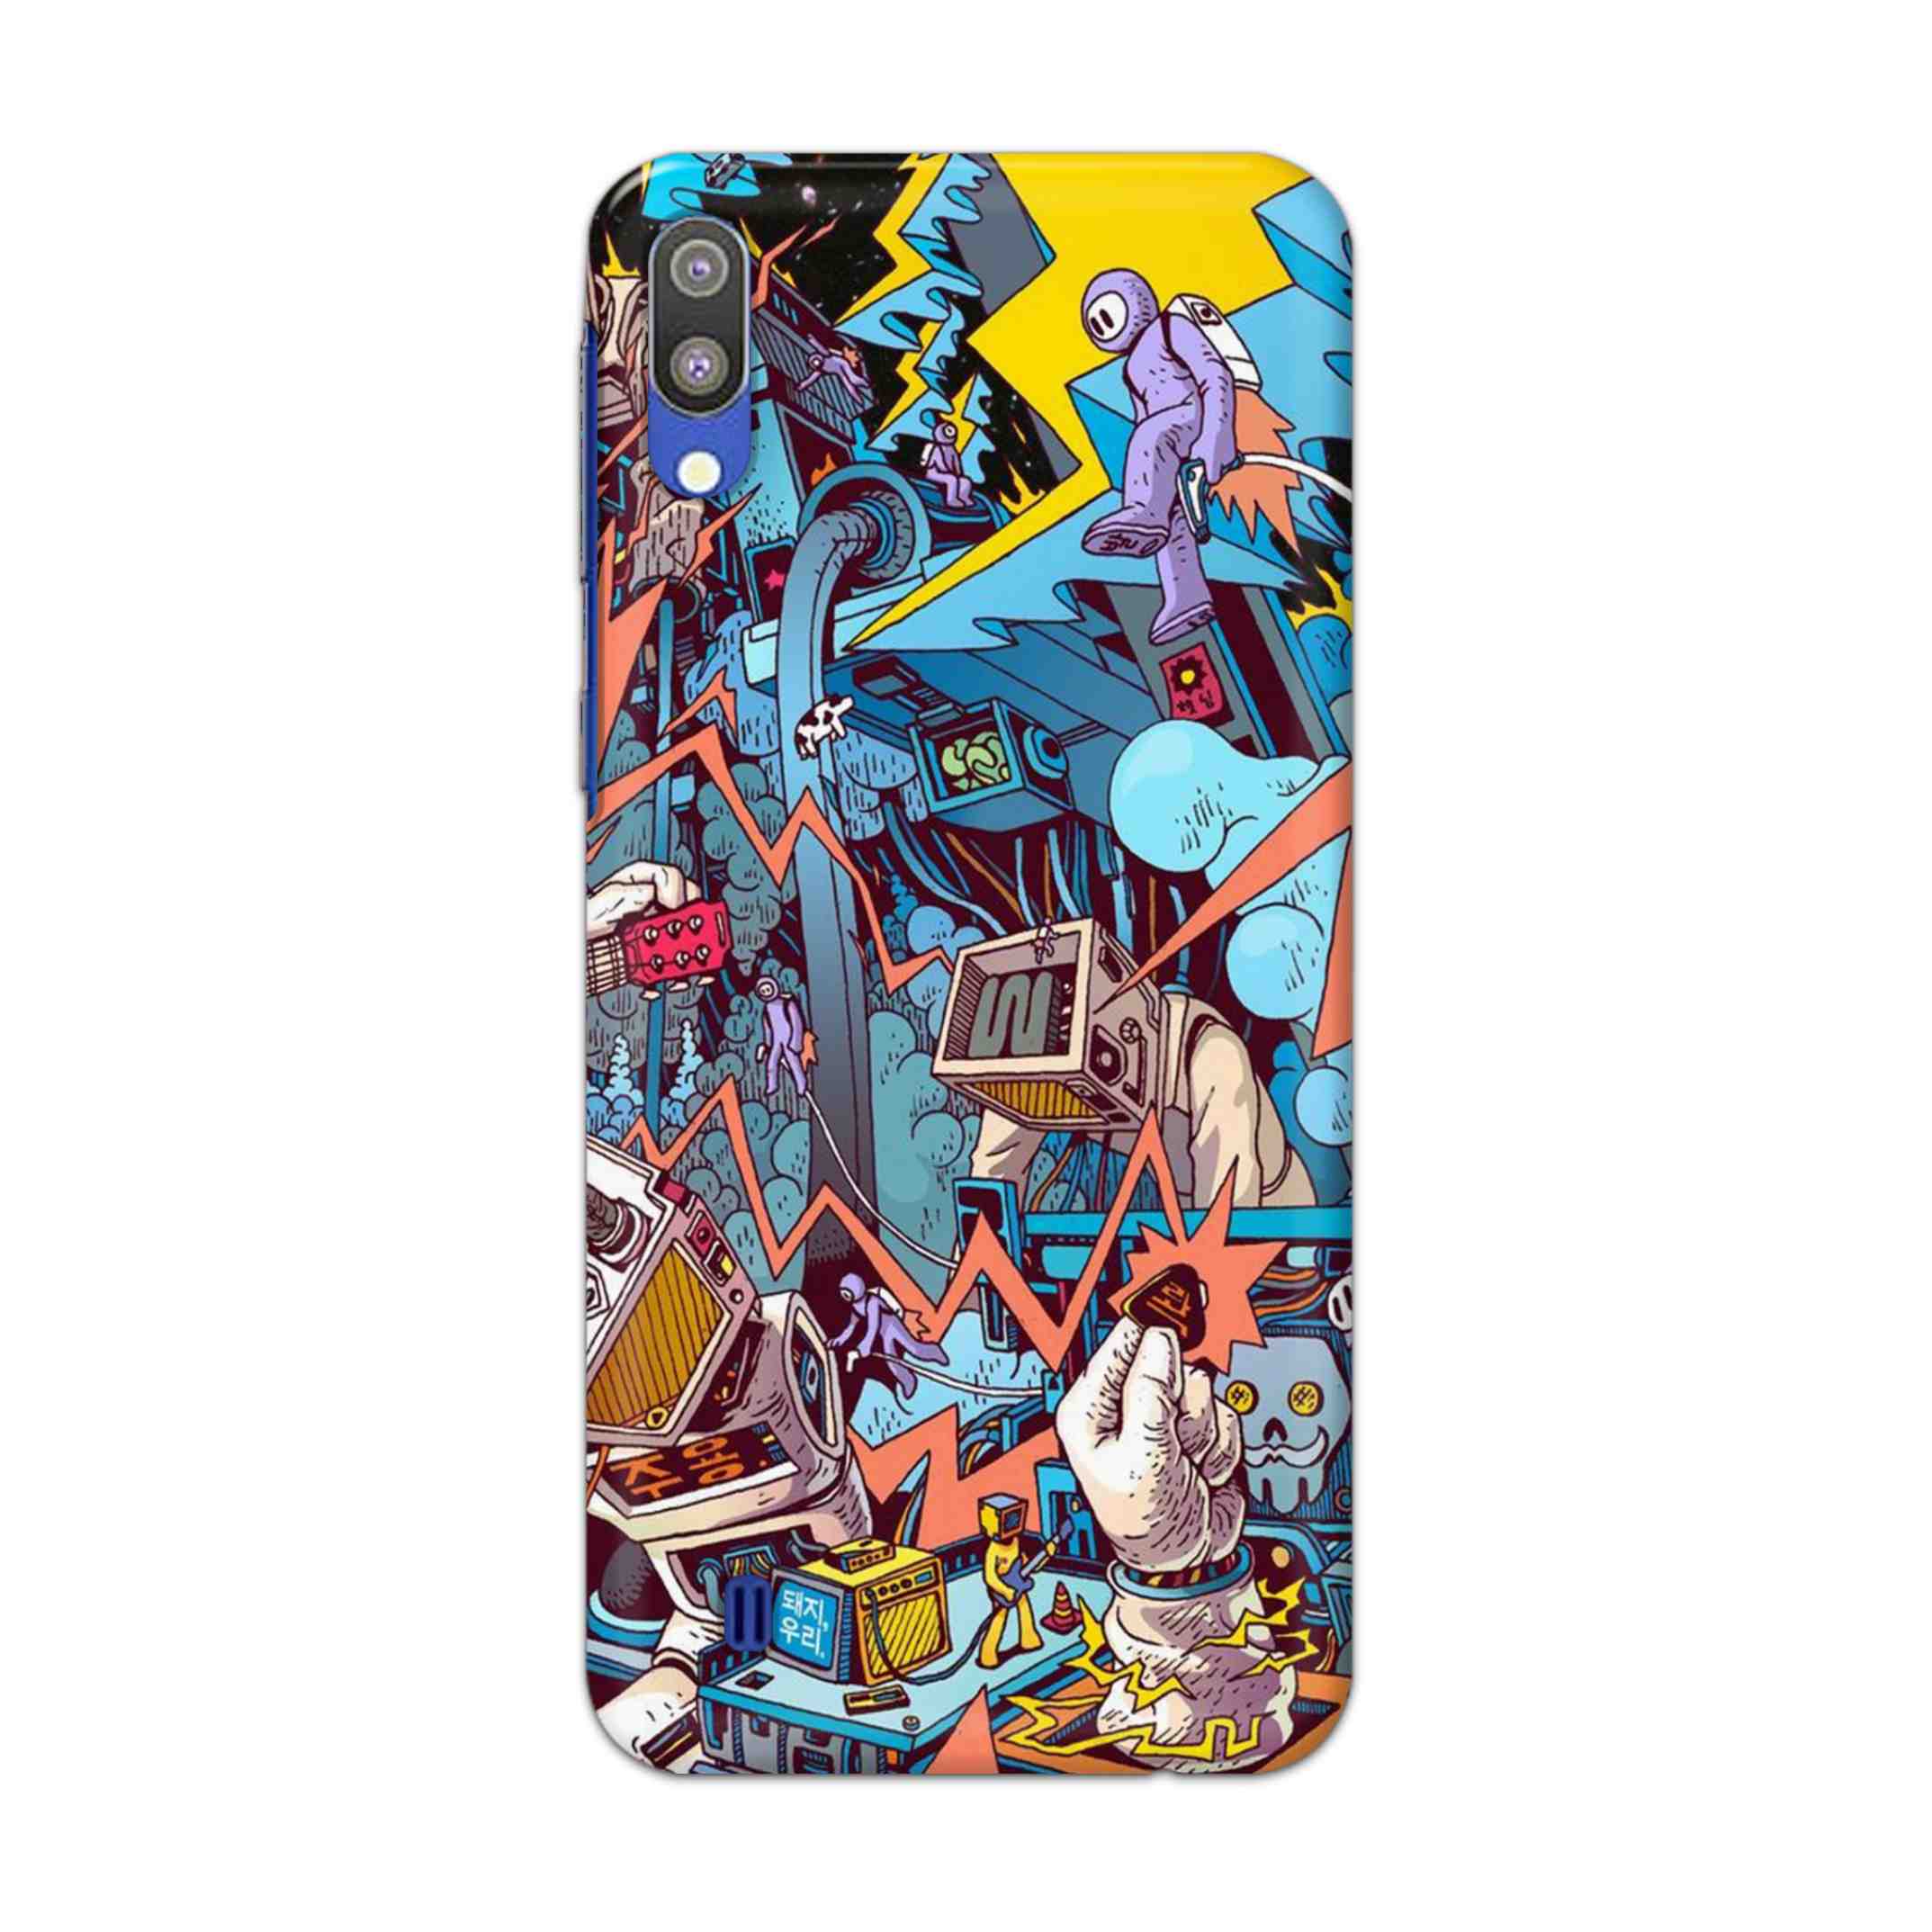 Buy Ofo Panic Hard Back Mobile Phone Case Cover For Samsung Galaxy M10 Online